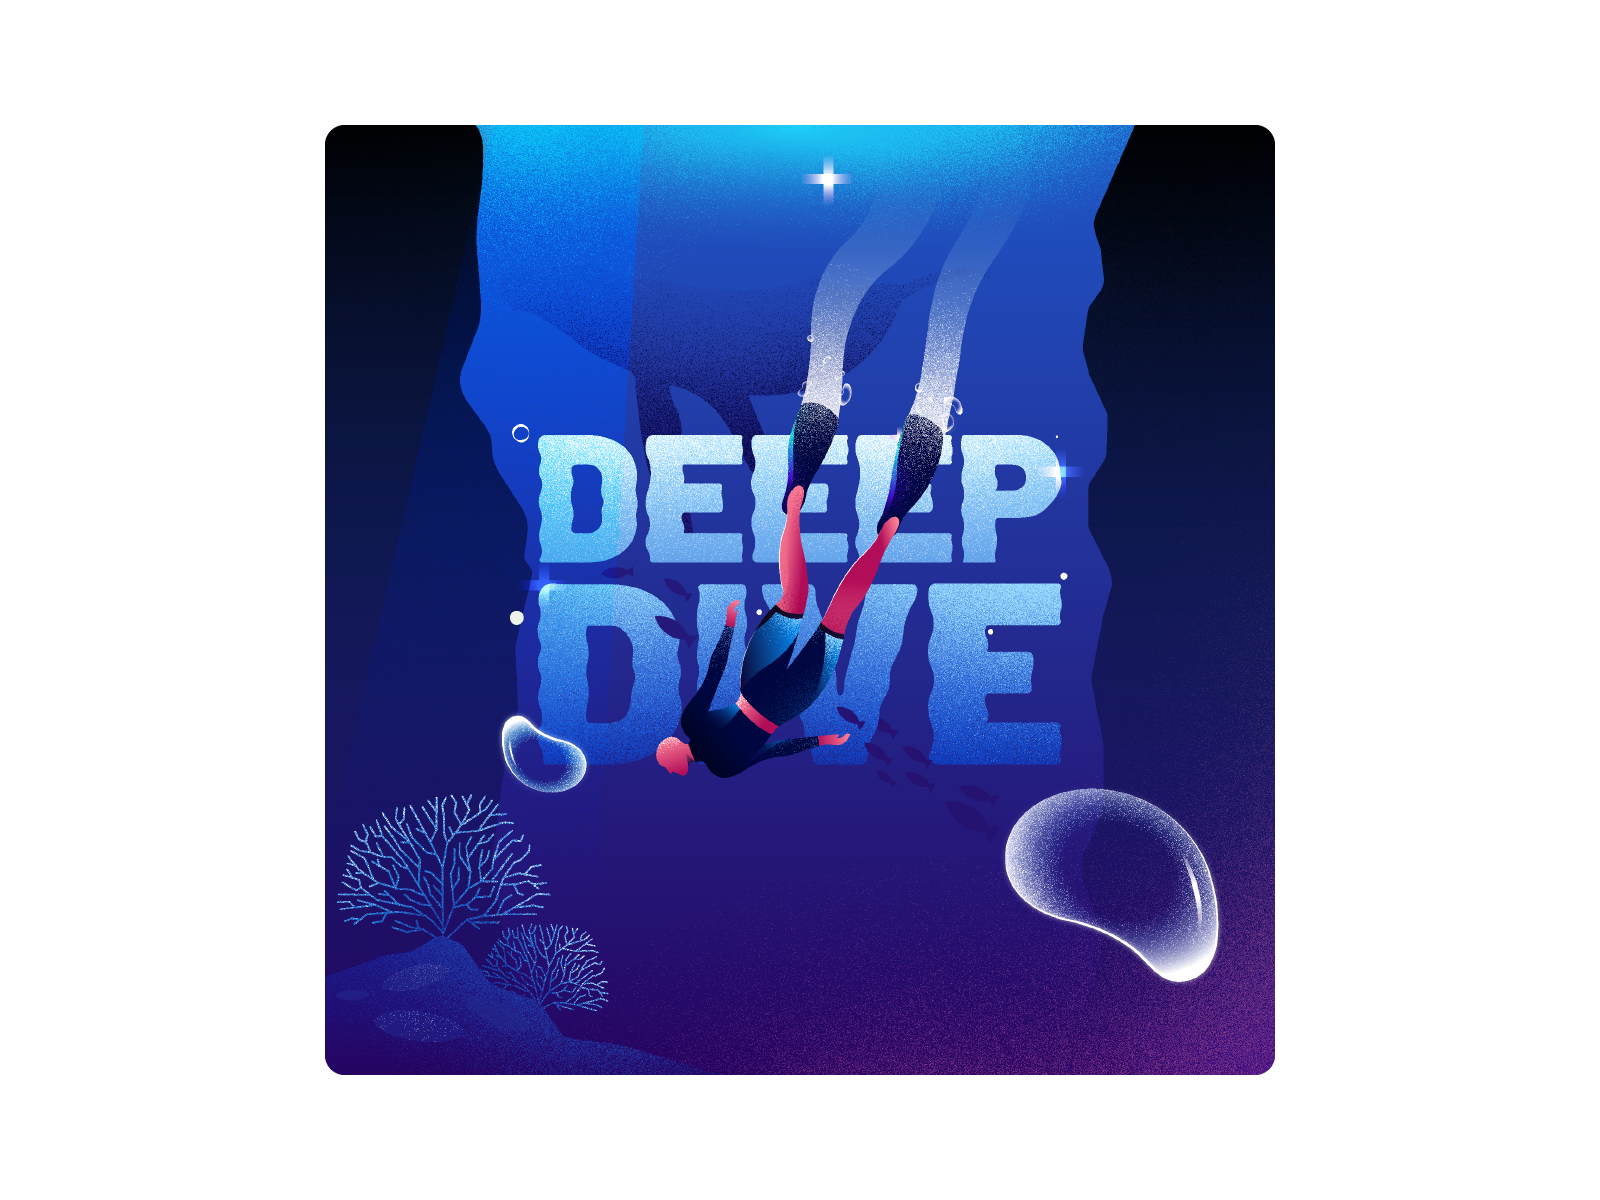 DEEEP DIVE - Podcast cover illustration free dive ocean life deep blue deep sea dive diver cover art podcast podcast art concept creative colors dribbble vector illustration